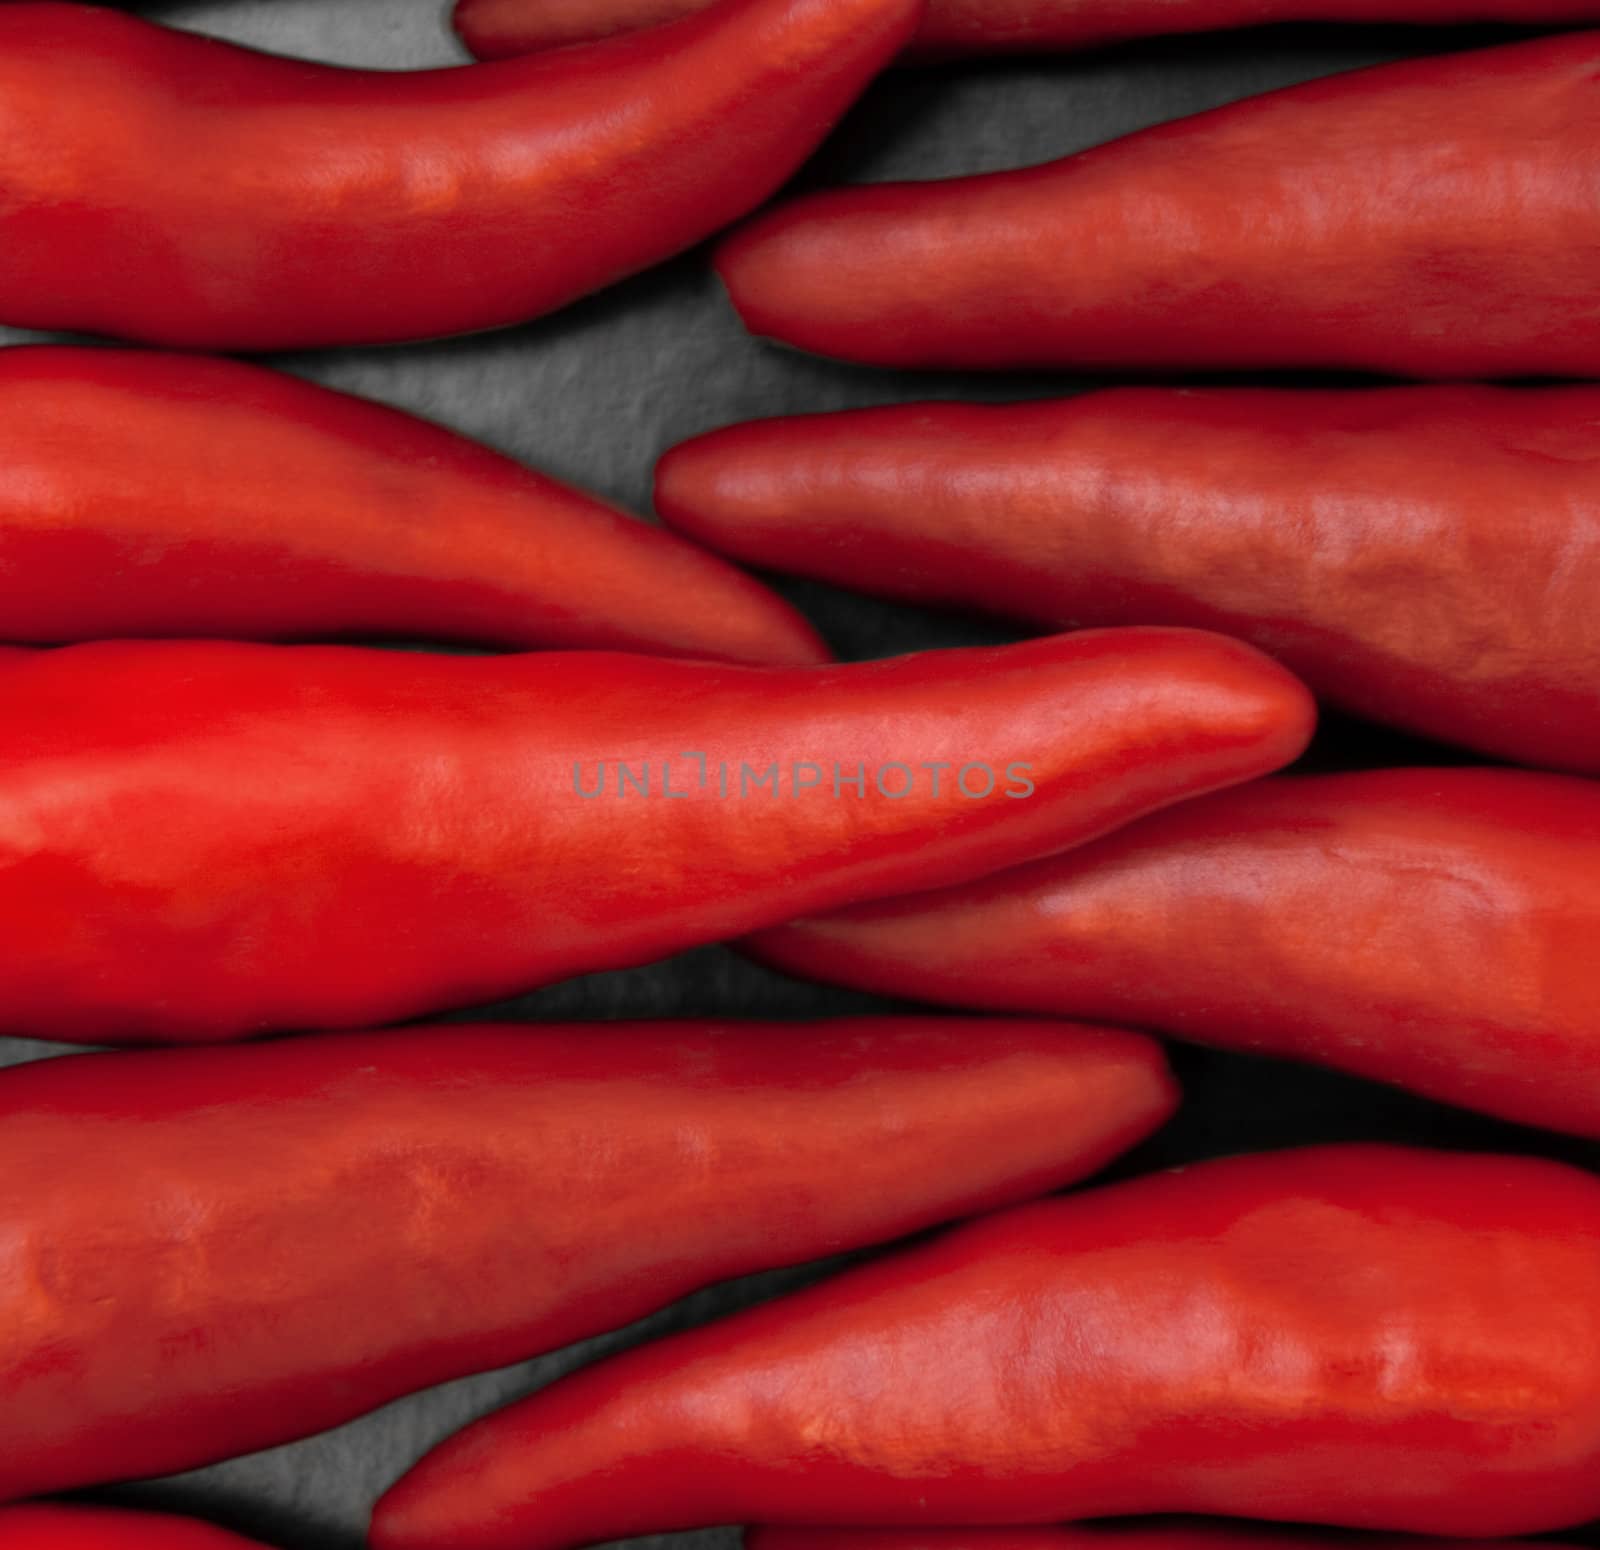 Overlapping chilli ends